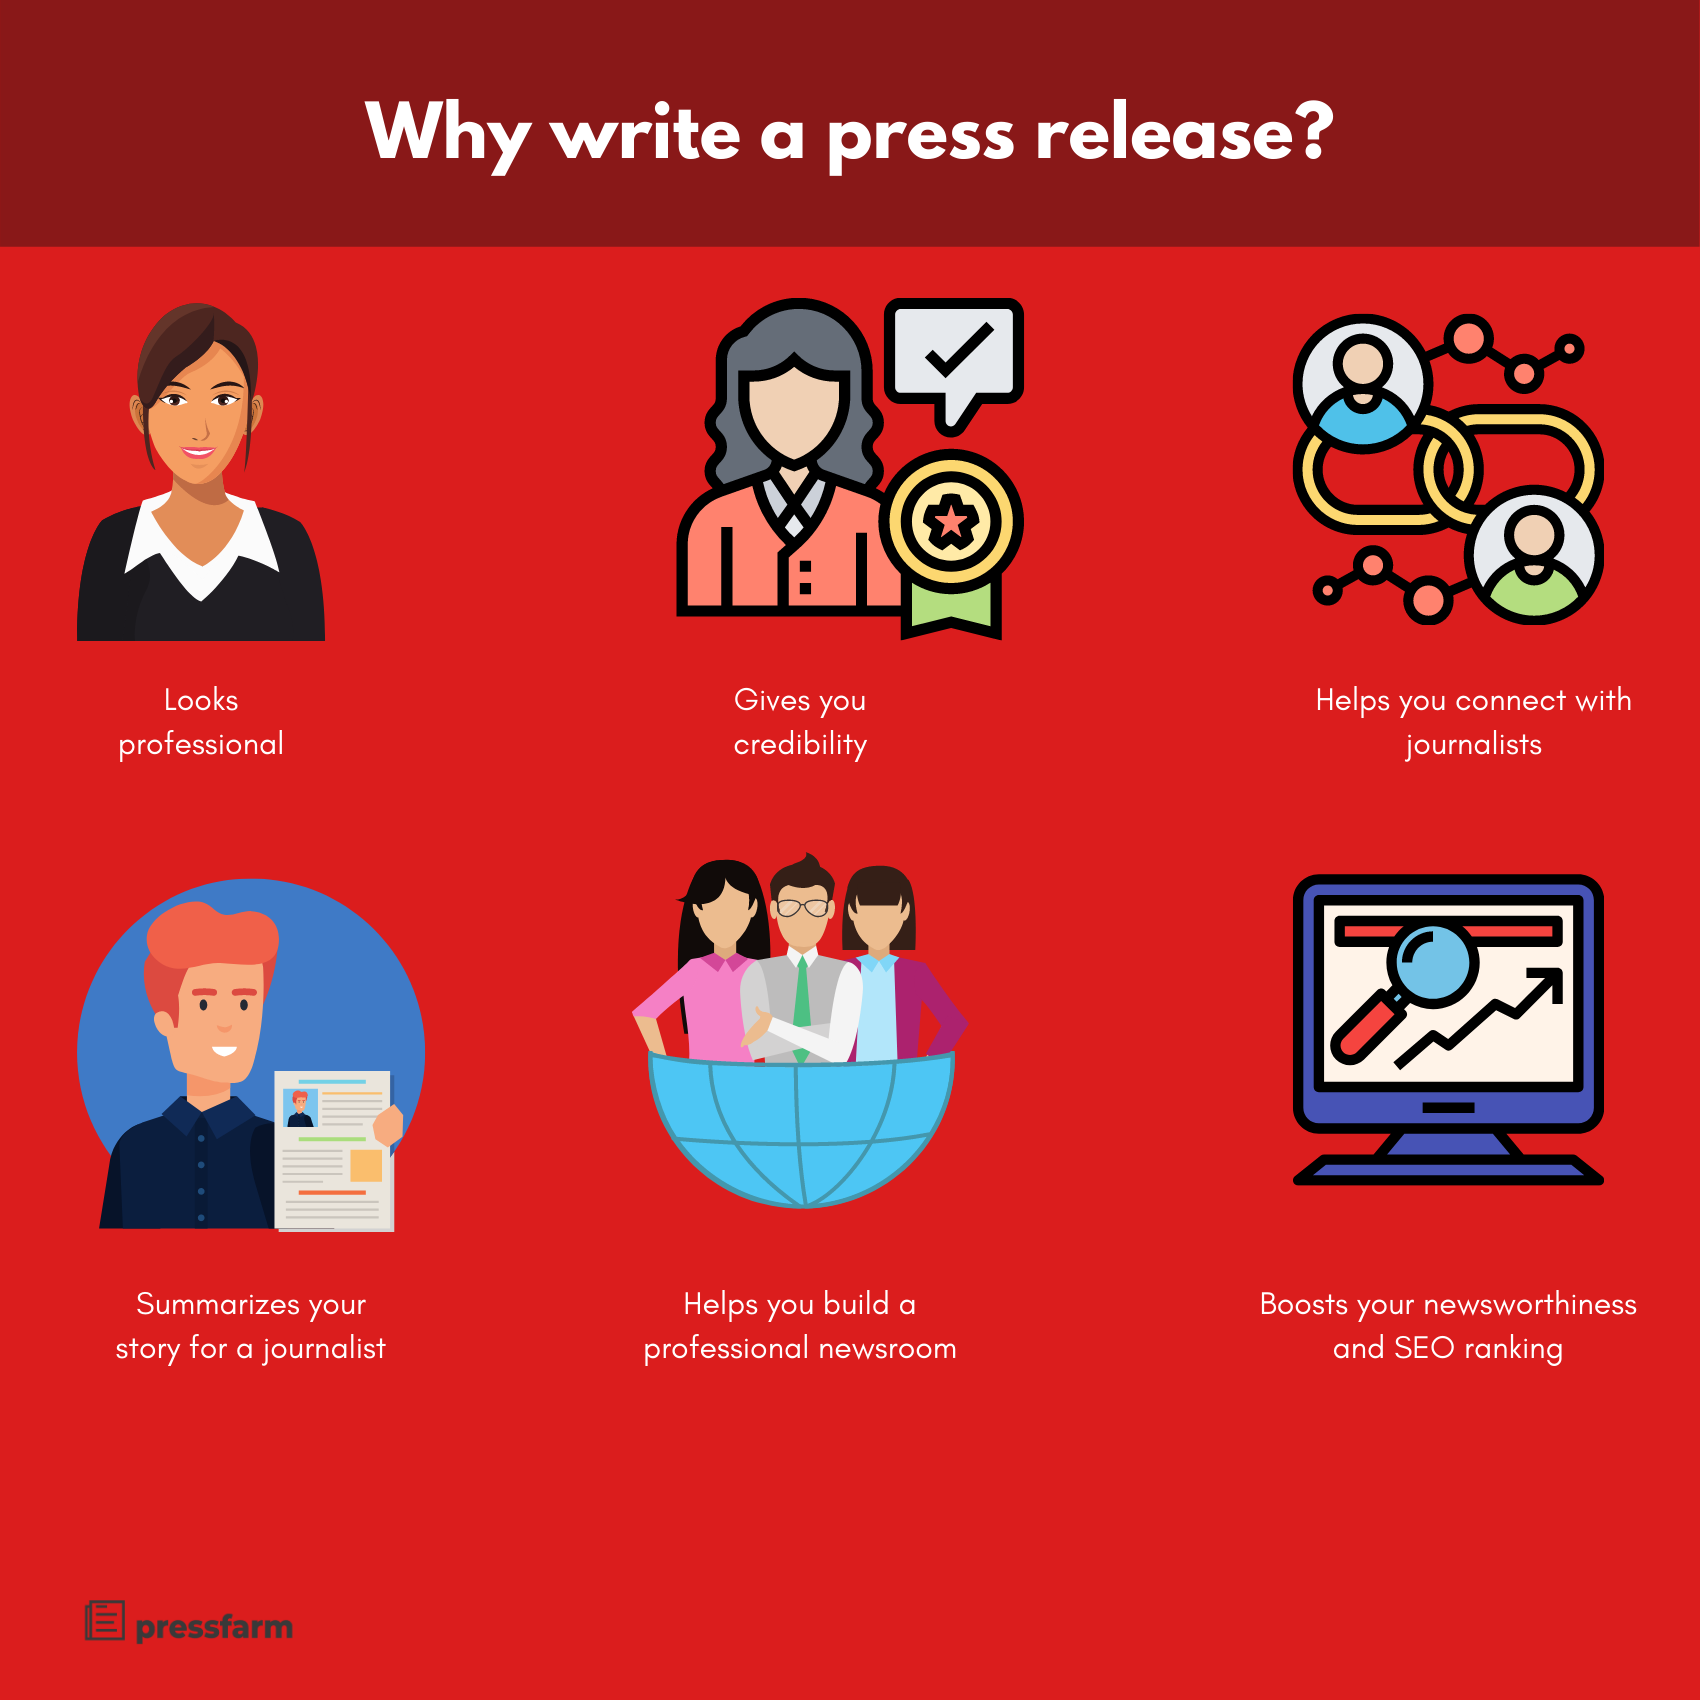 Why write a press release